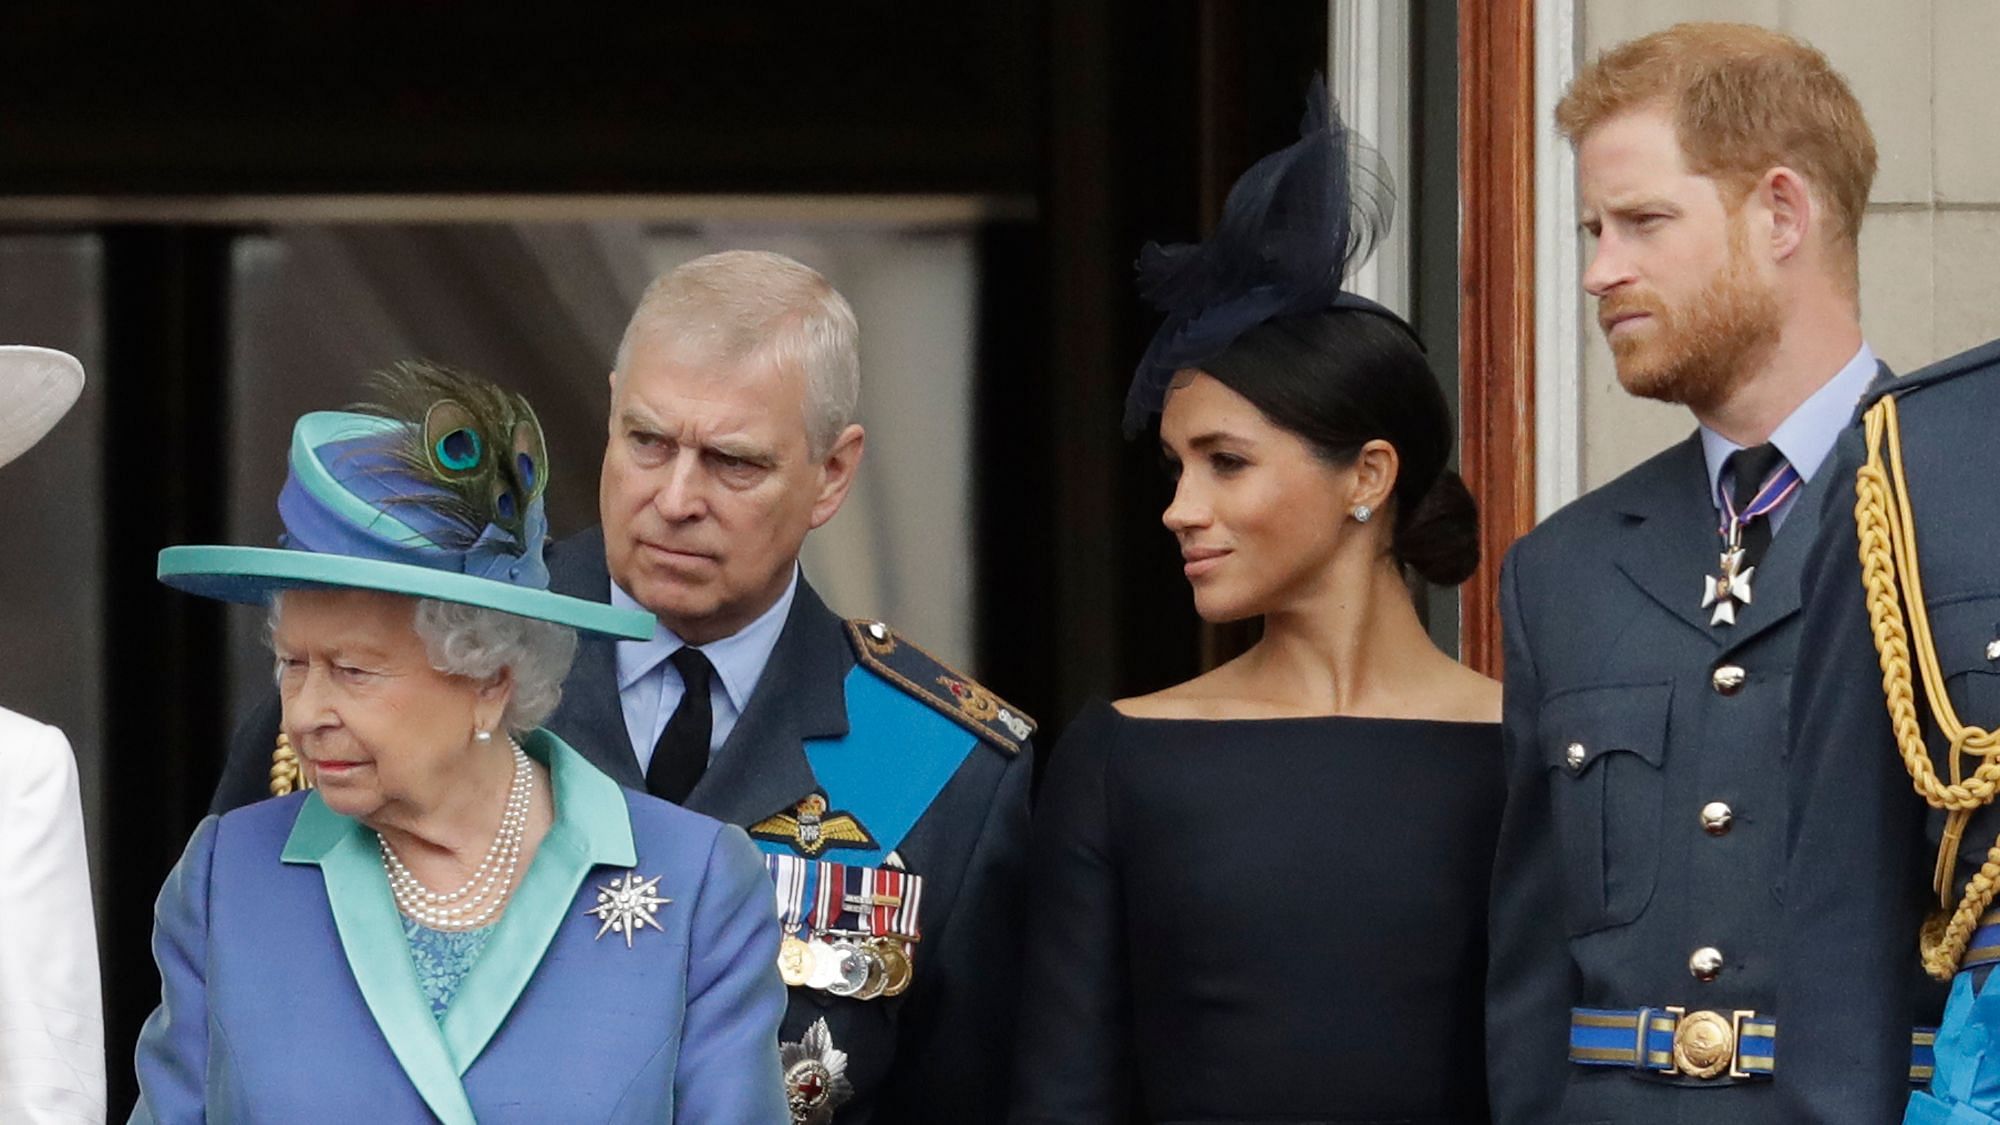 File photo of Queen Elizabeth II, Prince Andrew, Meghan the Duchess of Sussex and Prince Harry